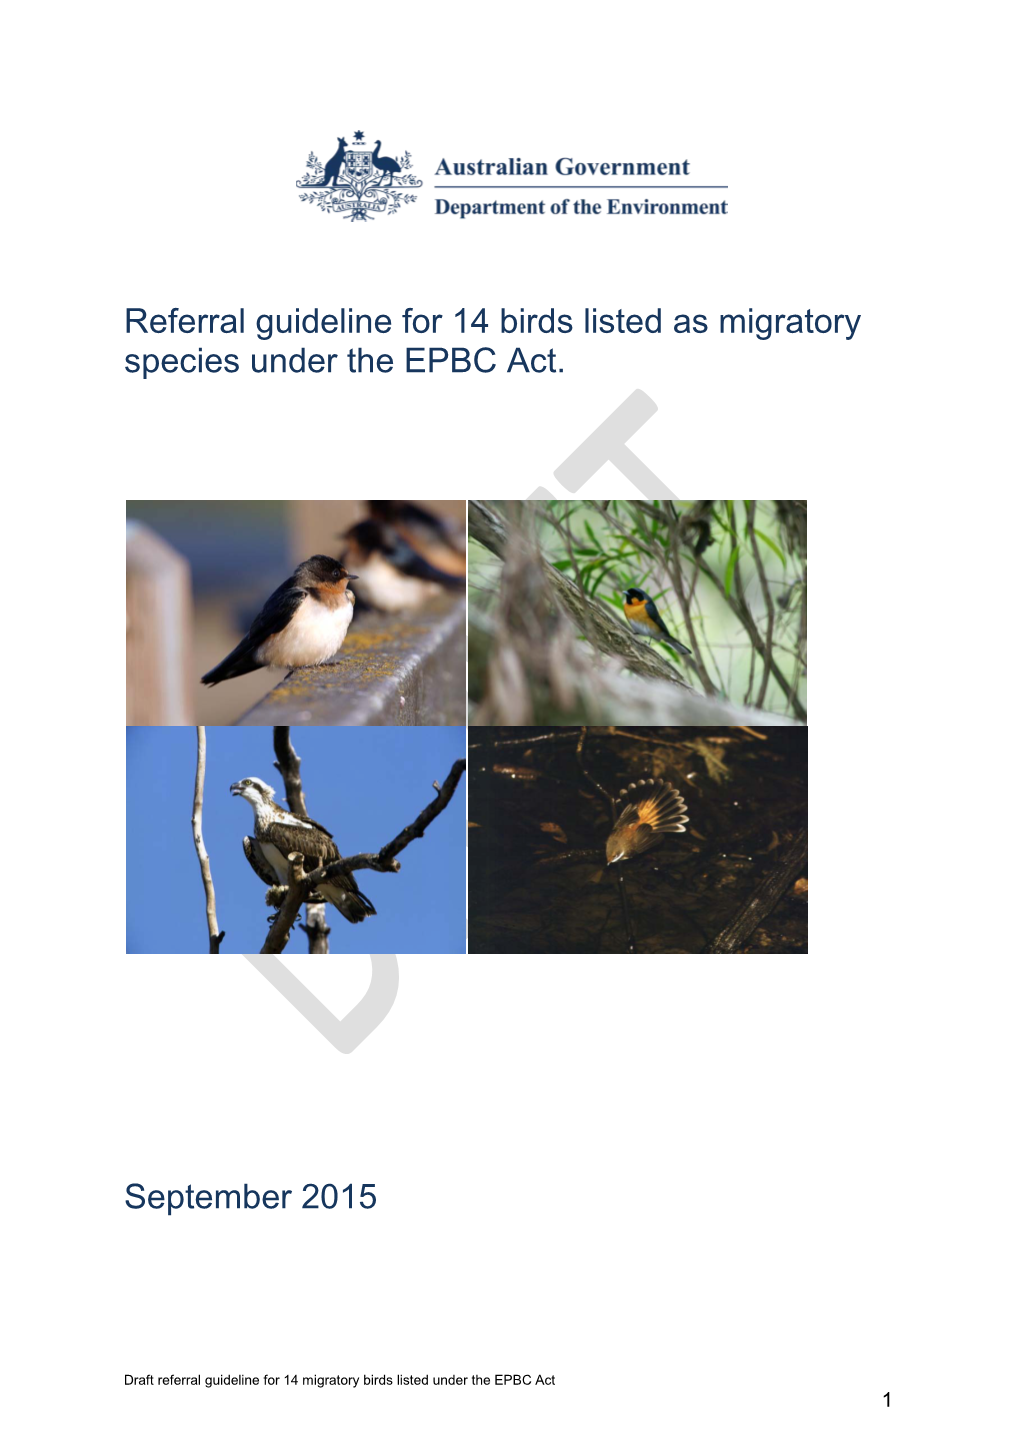 Referral Guideline for 14 Birds Listed As Migratory Species Under the EPBC Act